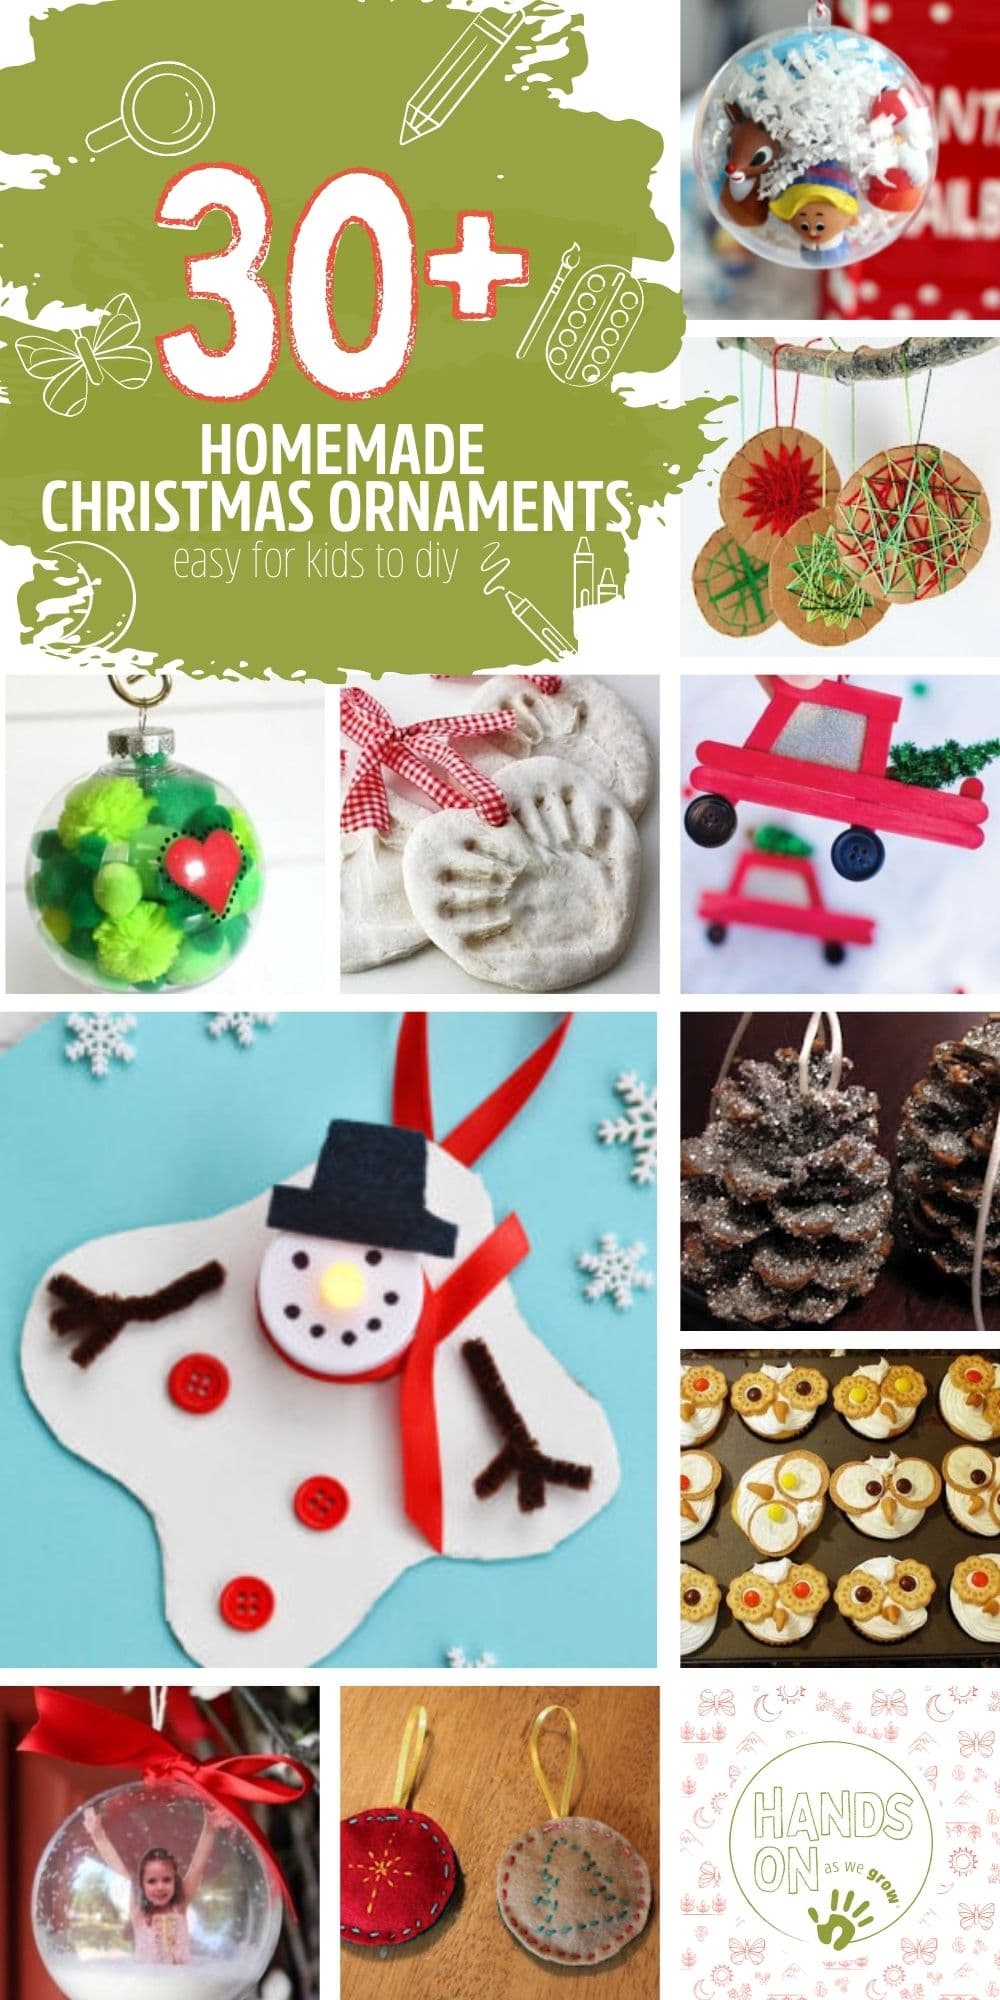 DIY some of these gorgeous homemade Christmas ornaments your kids can make! Keep an ornament or two for your tree or gift your kids DIY ornaments to loved ones.